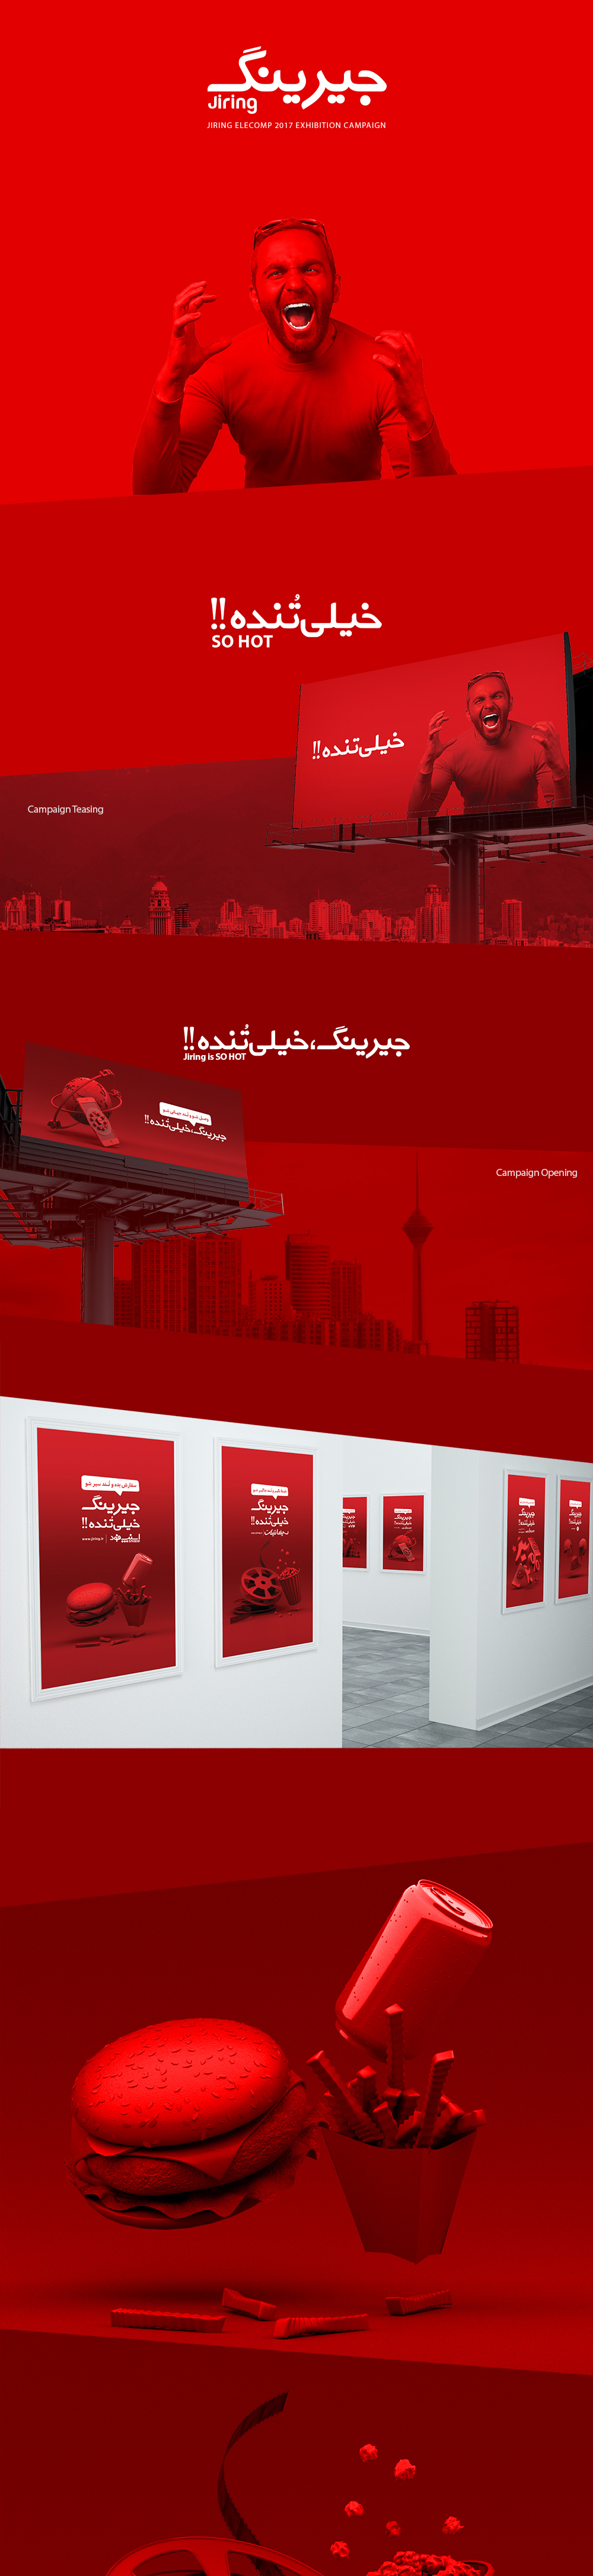 Jiring Advertising  red Hot Iran Exhibition  campaign ads